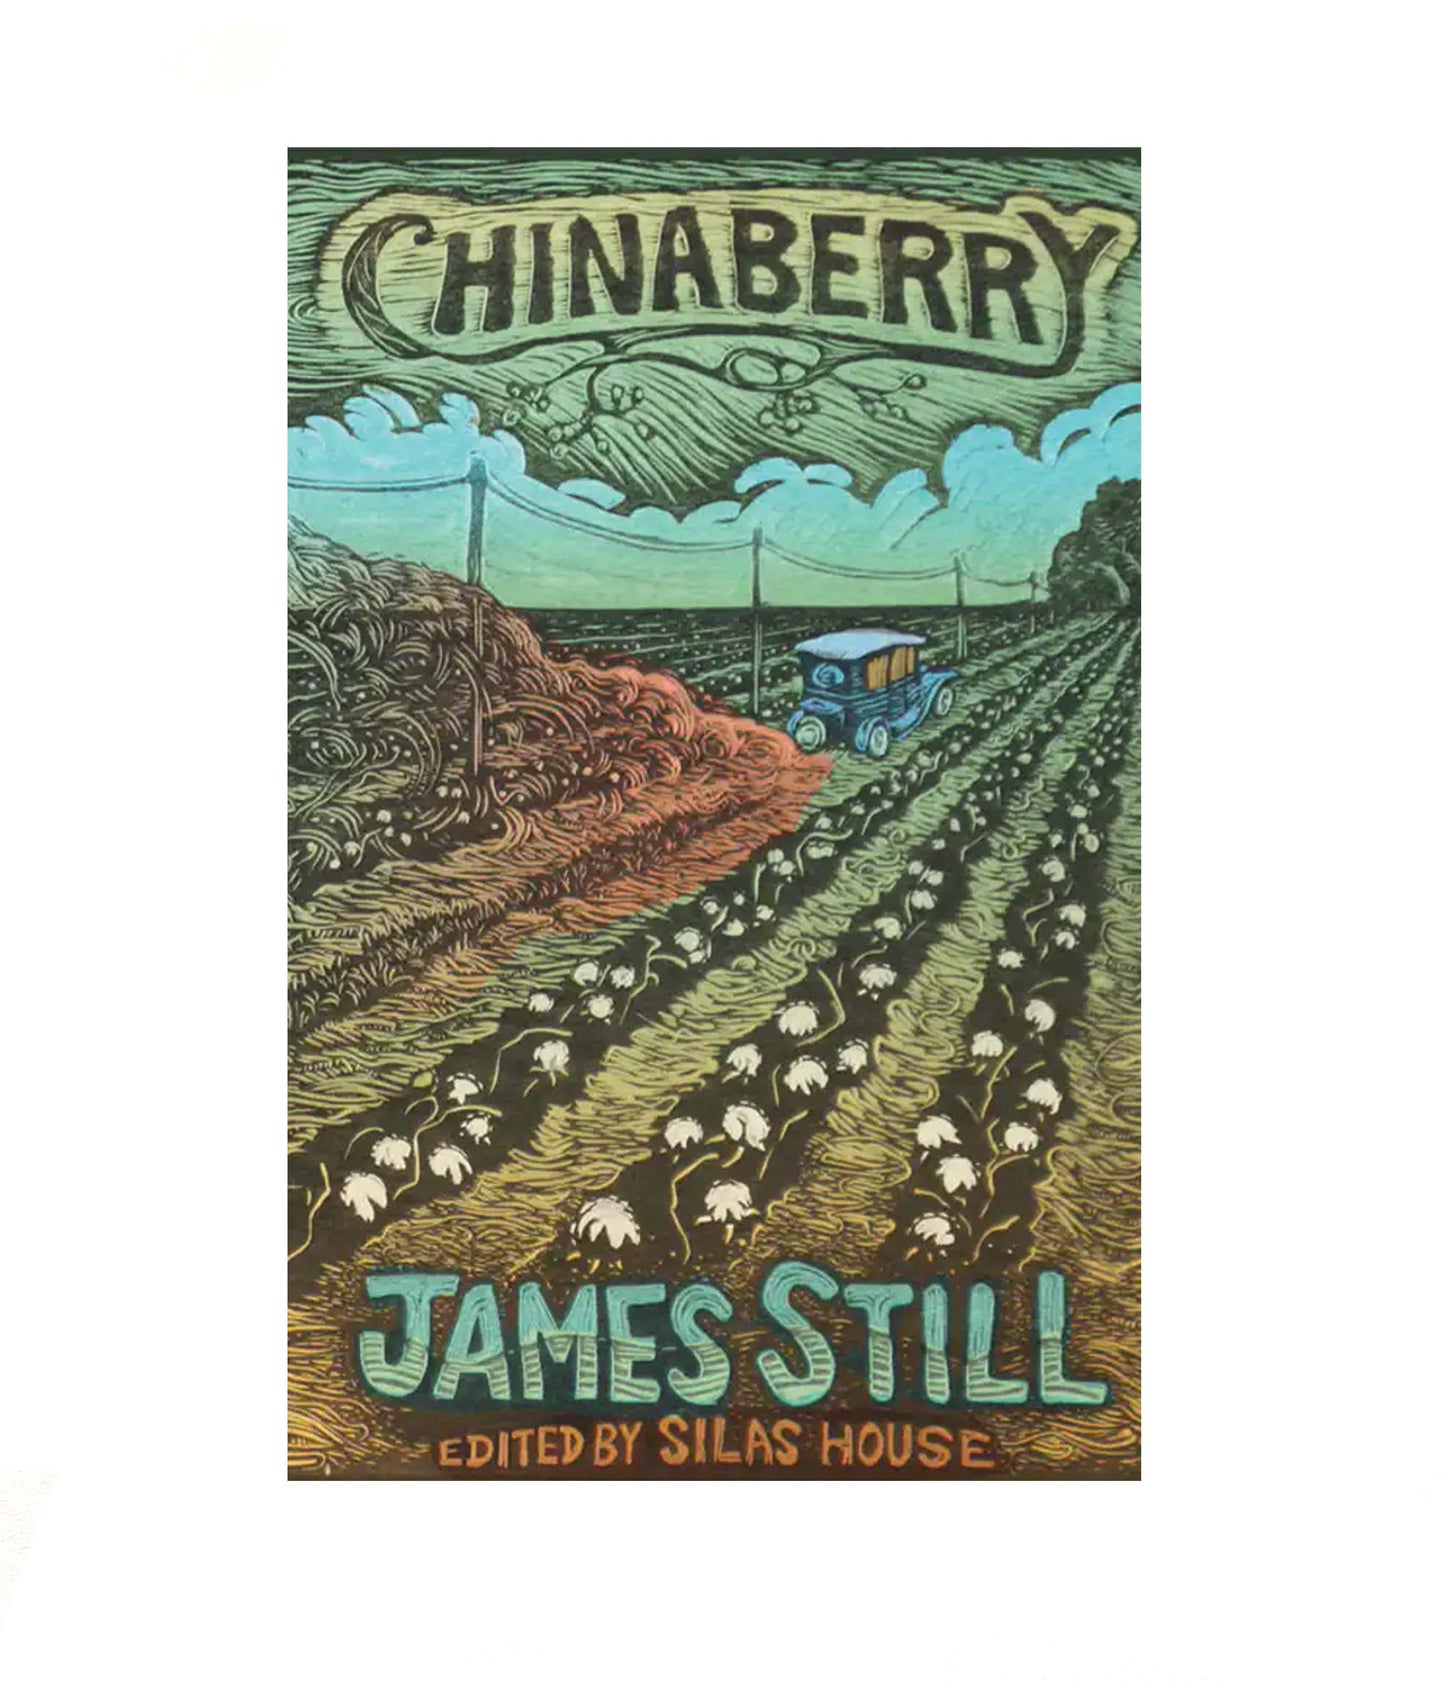 Chinaberry by James Still